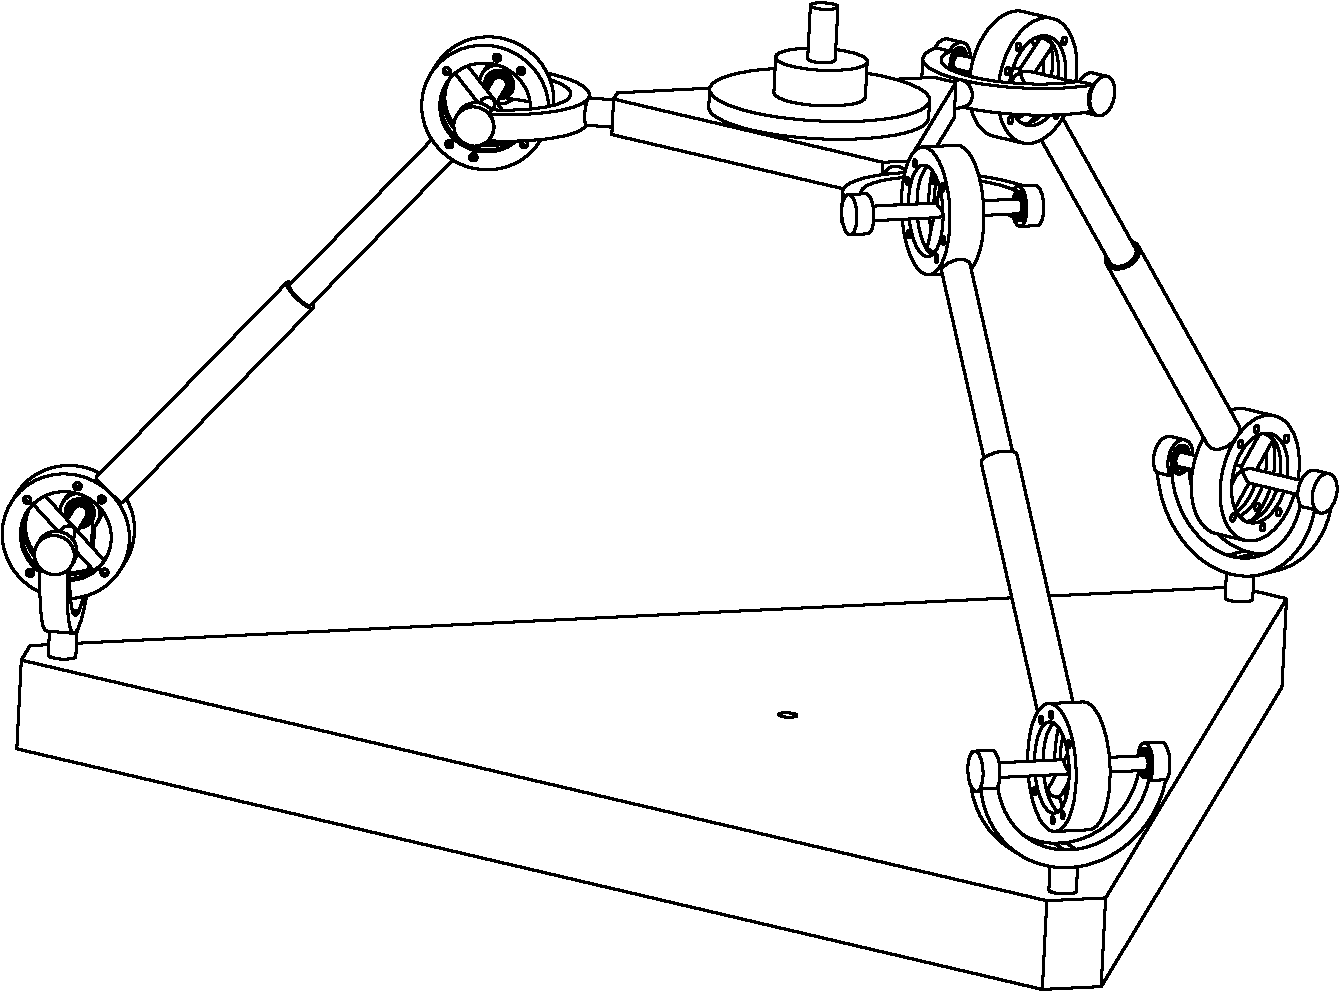 Parallel mechanism with changeable freedom degree